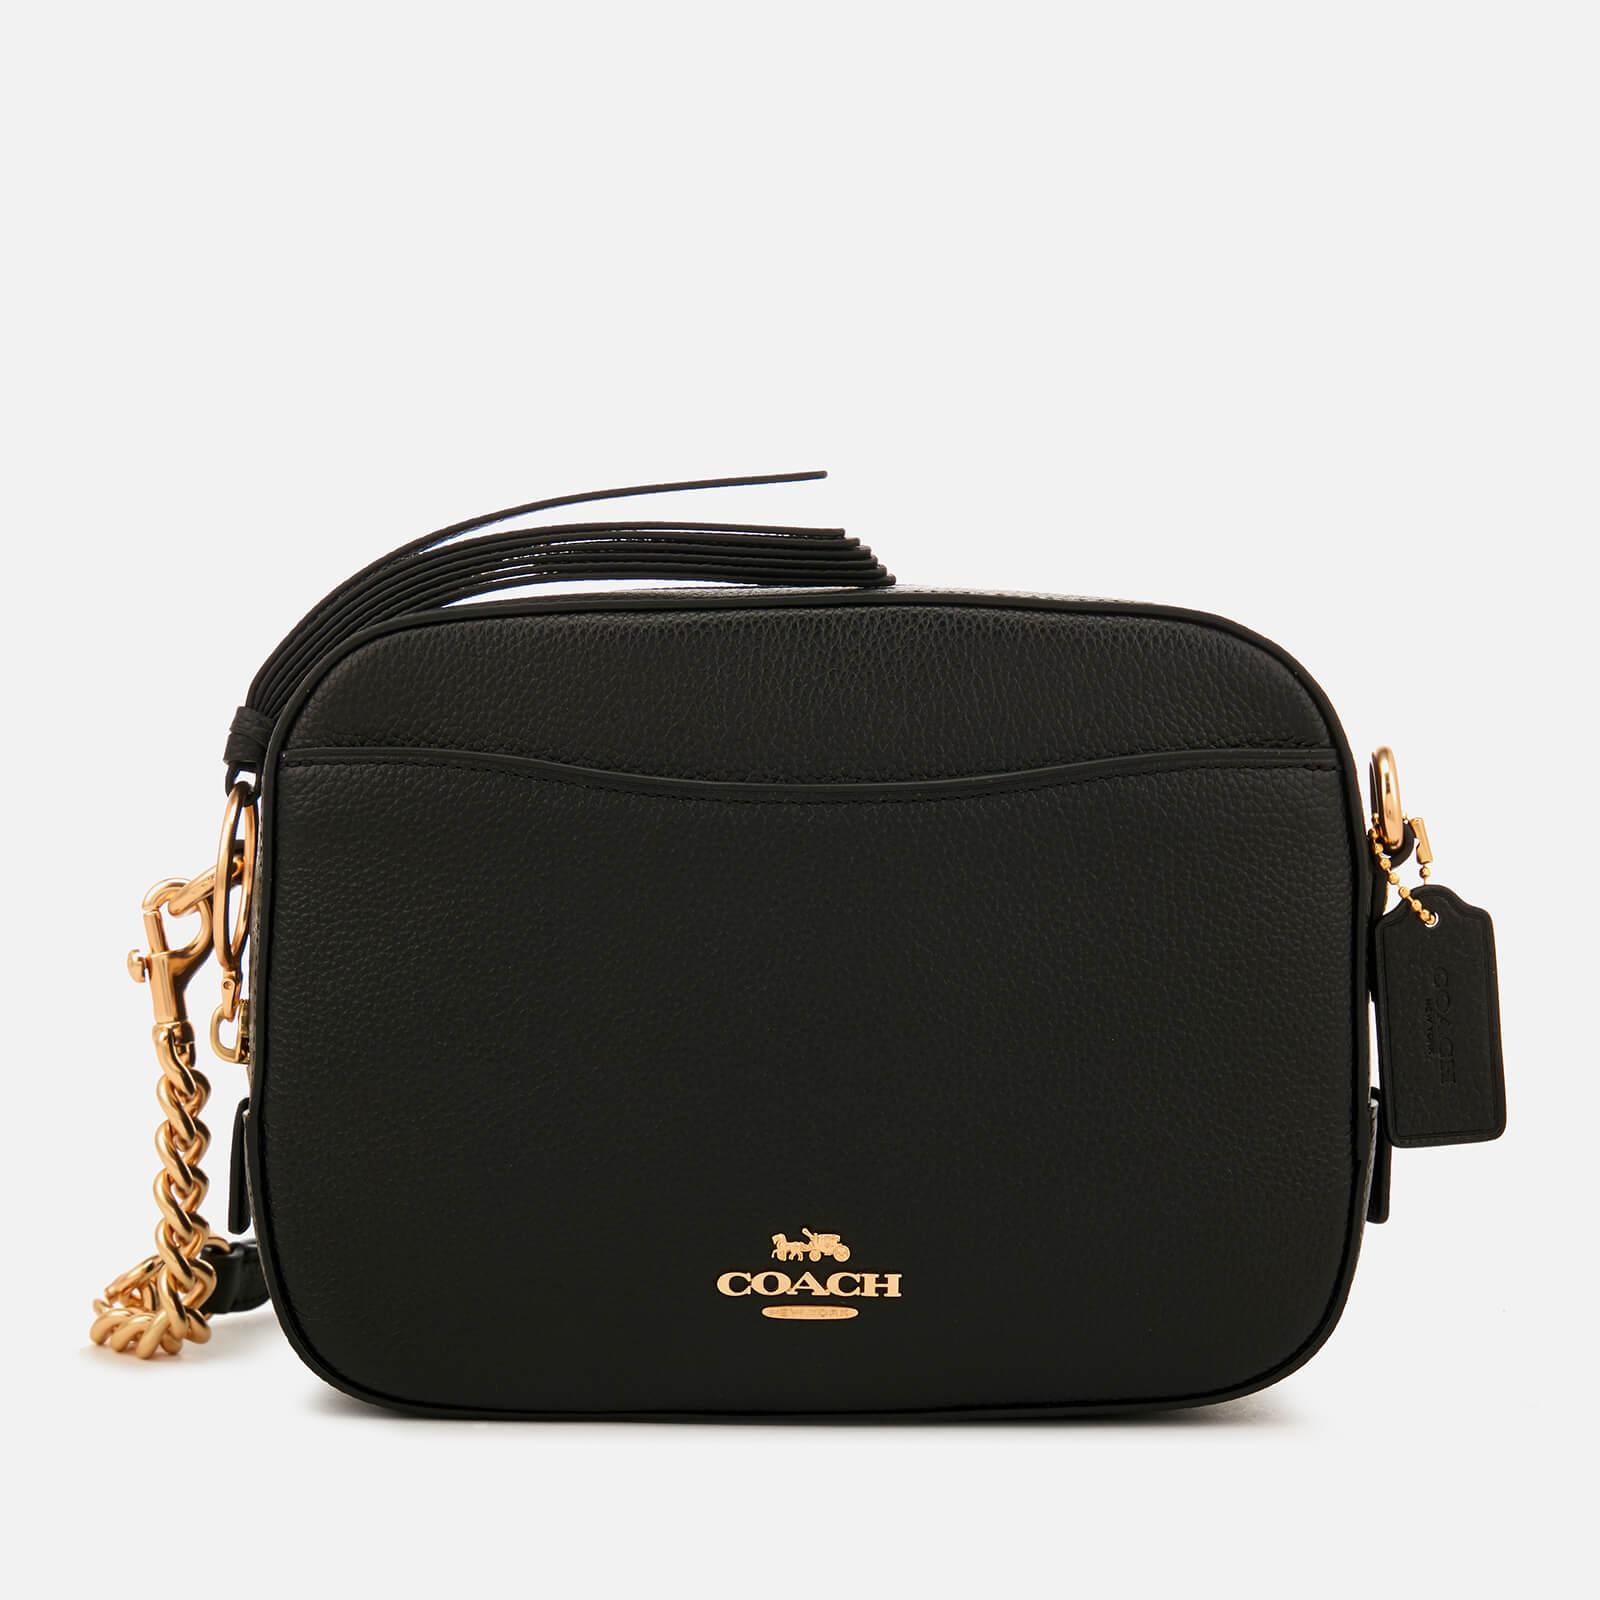 COACH Polished Pebble Leather Camera Bag in Black - Lyst